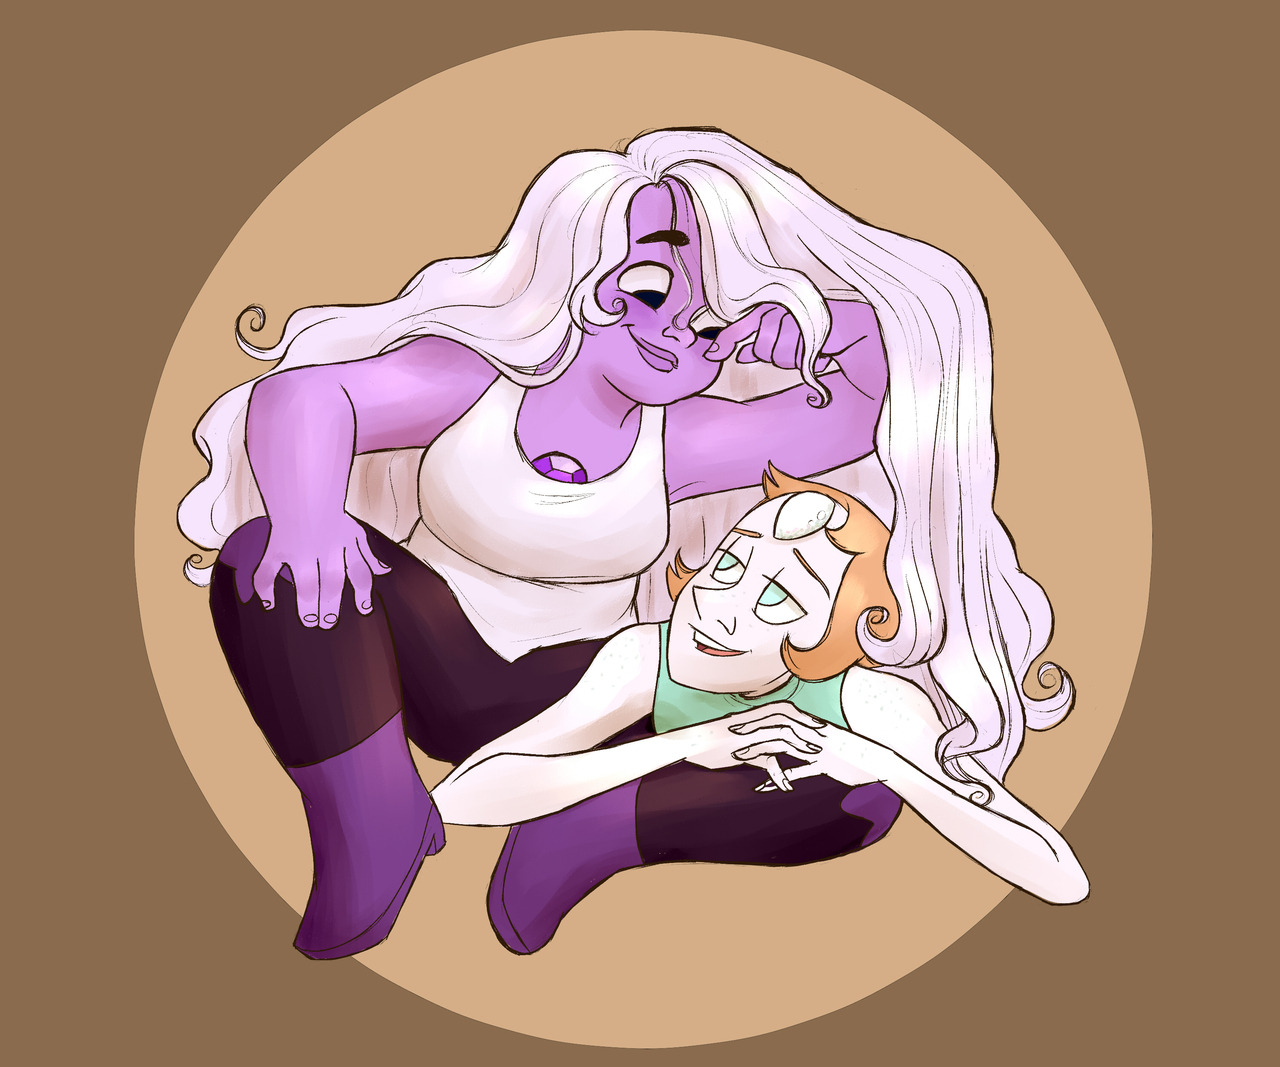 ★
Sofia ★ 19 
★ Welcome! here is mostly Steven Universe stuff and sometimes i post drawings